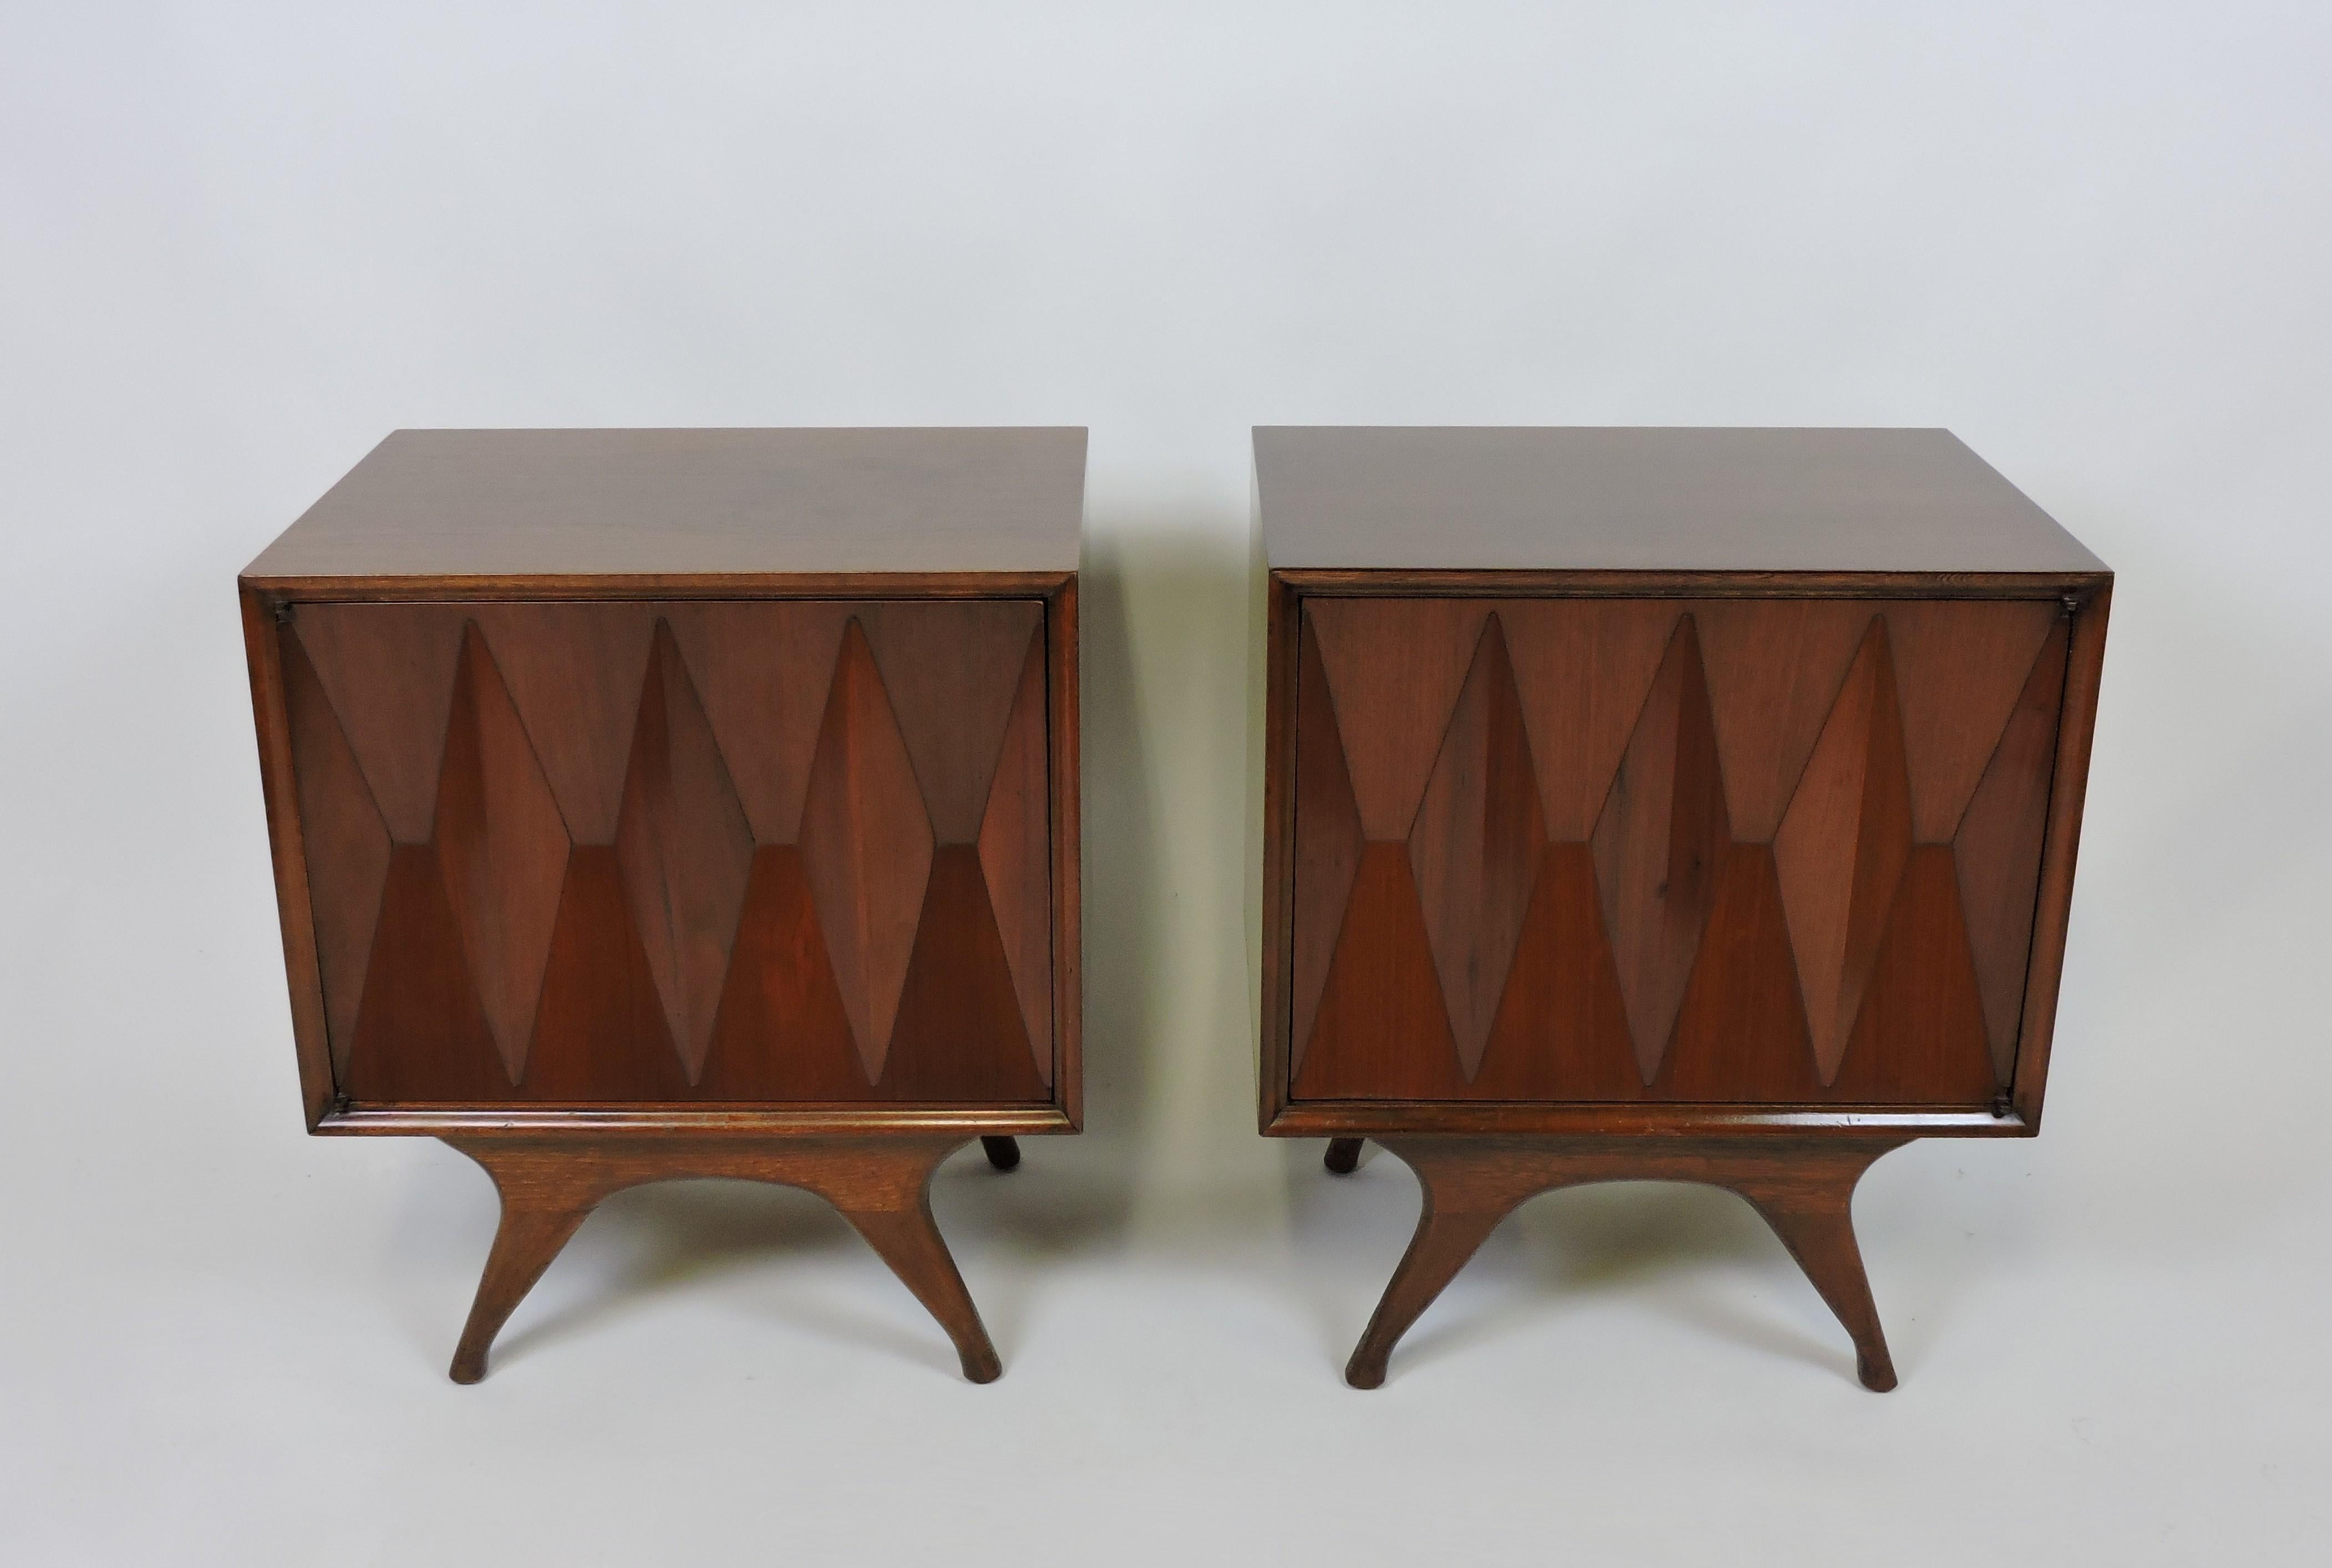 Very cool Albert Parvin diamond front nightstands/end tables. These tables have sculpted 3- dimensional fronts in a diamond pattern along with graceful splayed legs. Each has an adjustable shelf and push-to-open mechanisms on the doors.